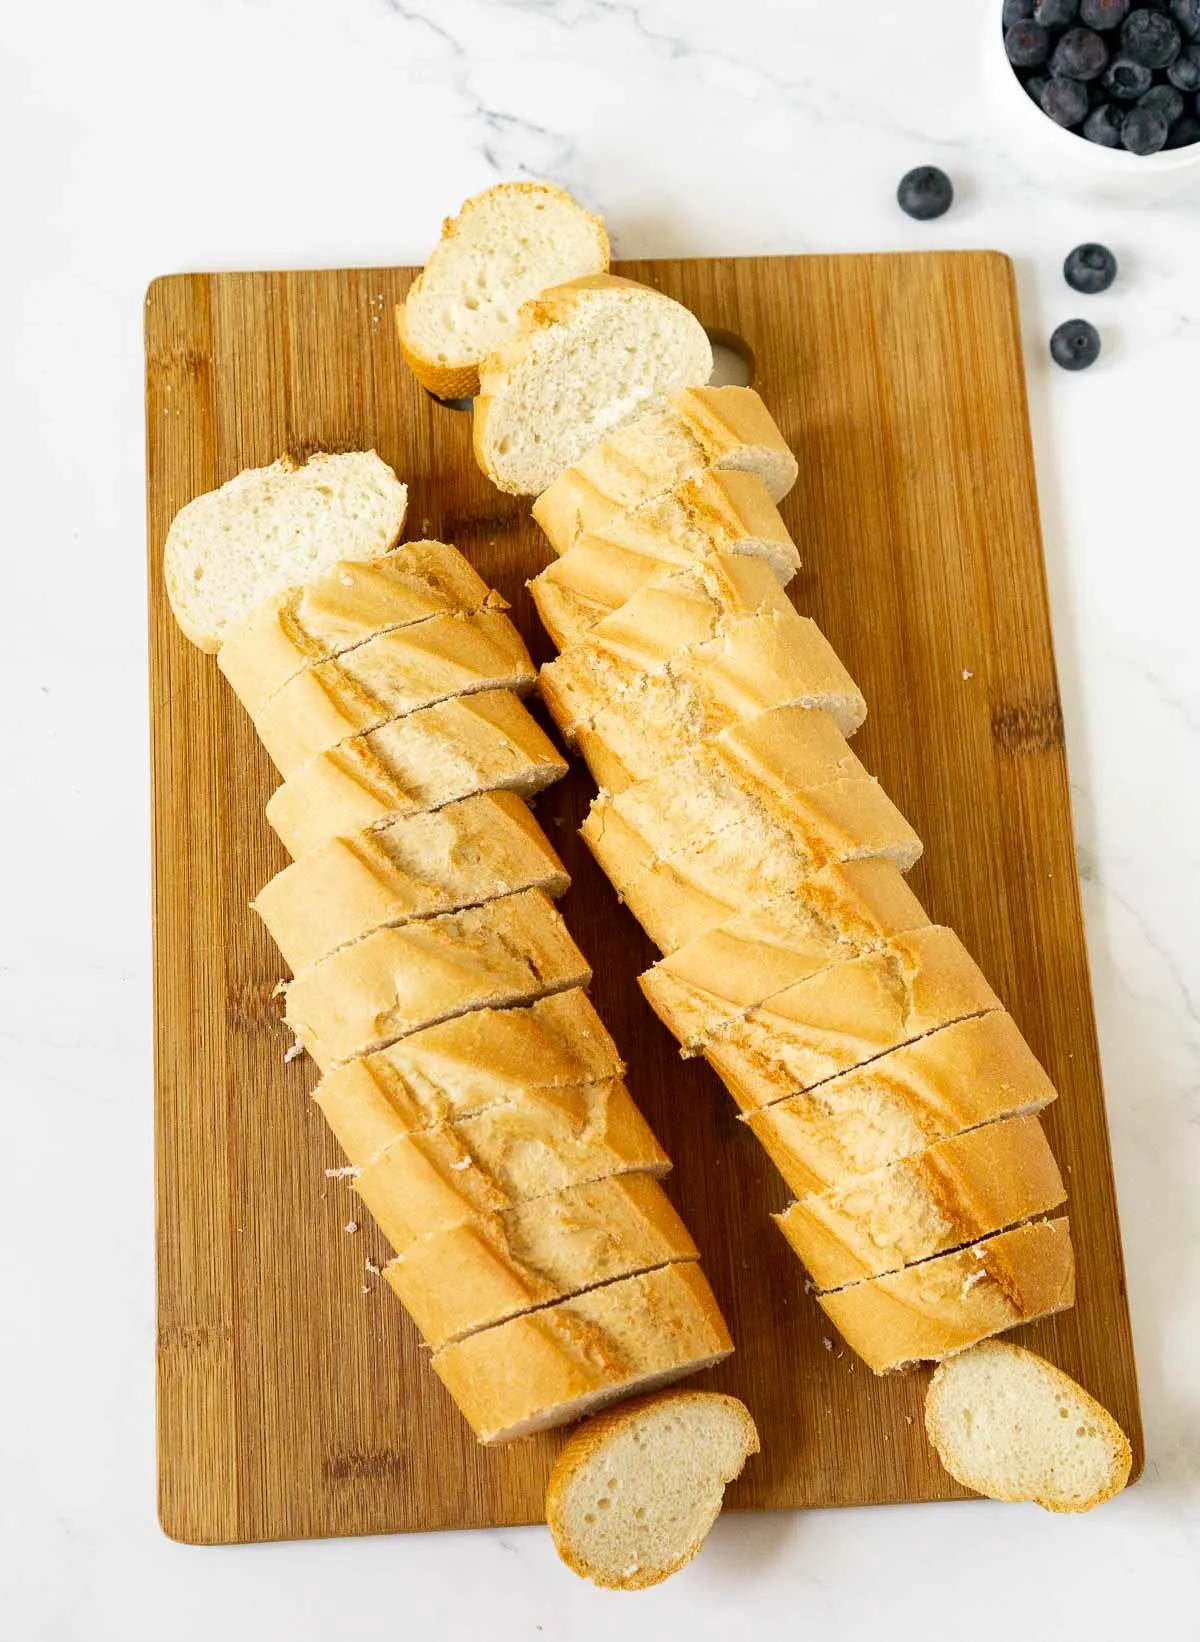 Sliced baguette on a cutting board